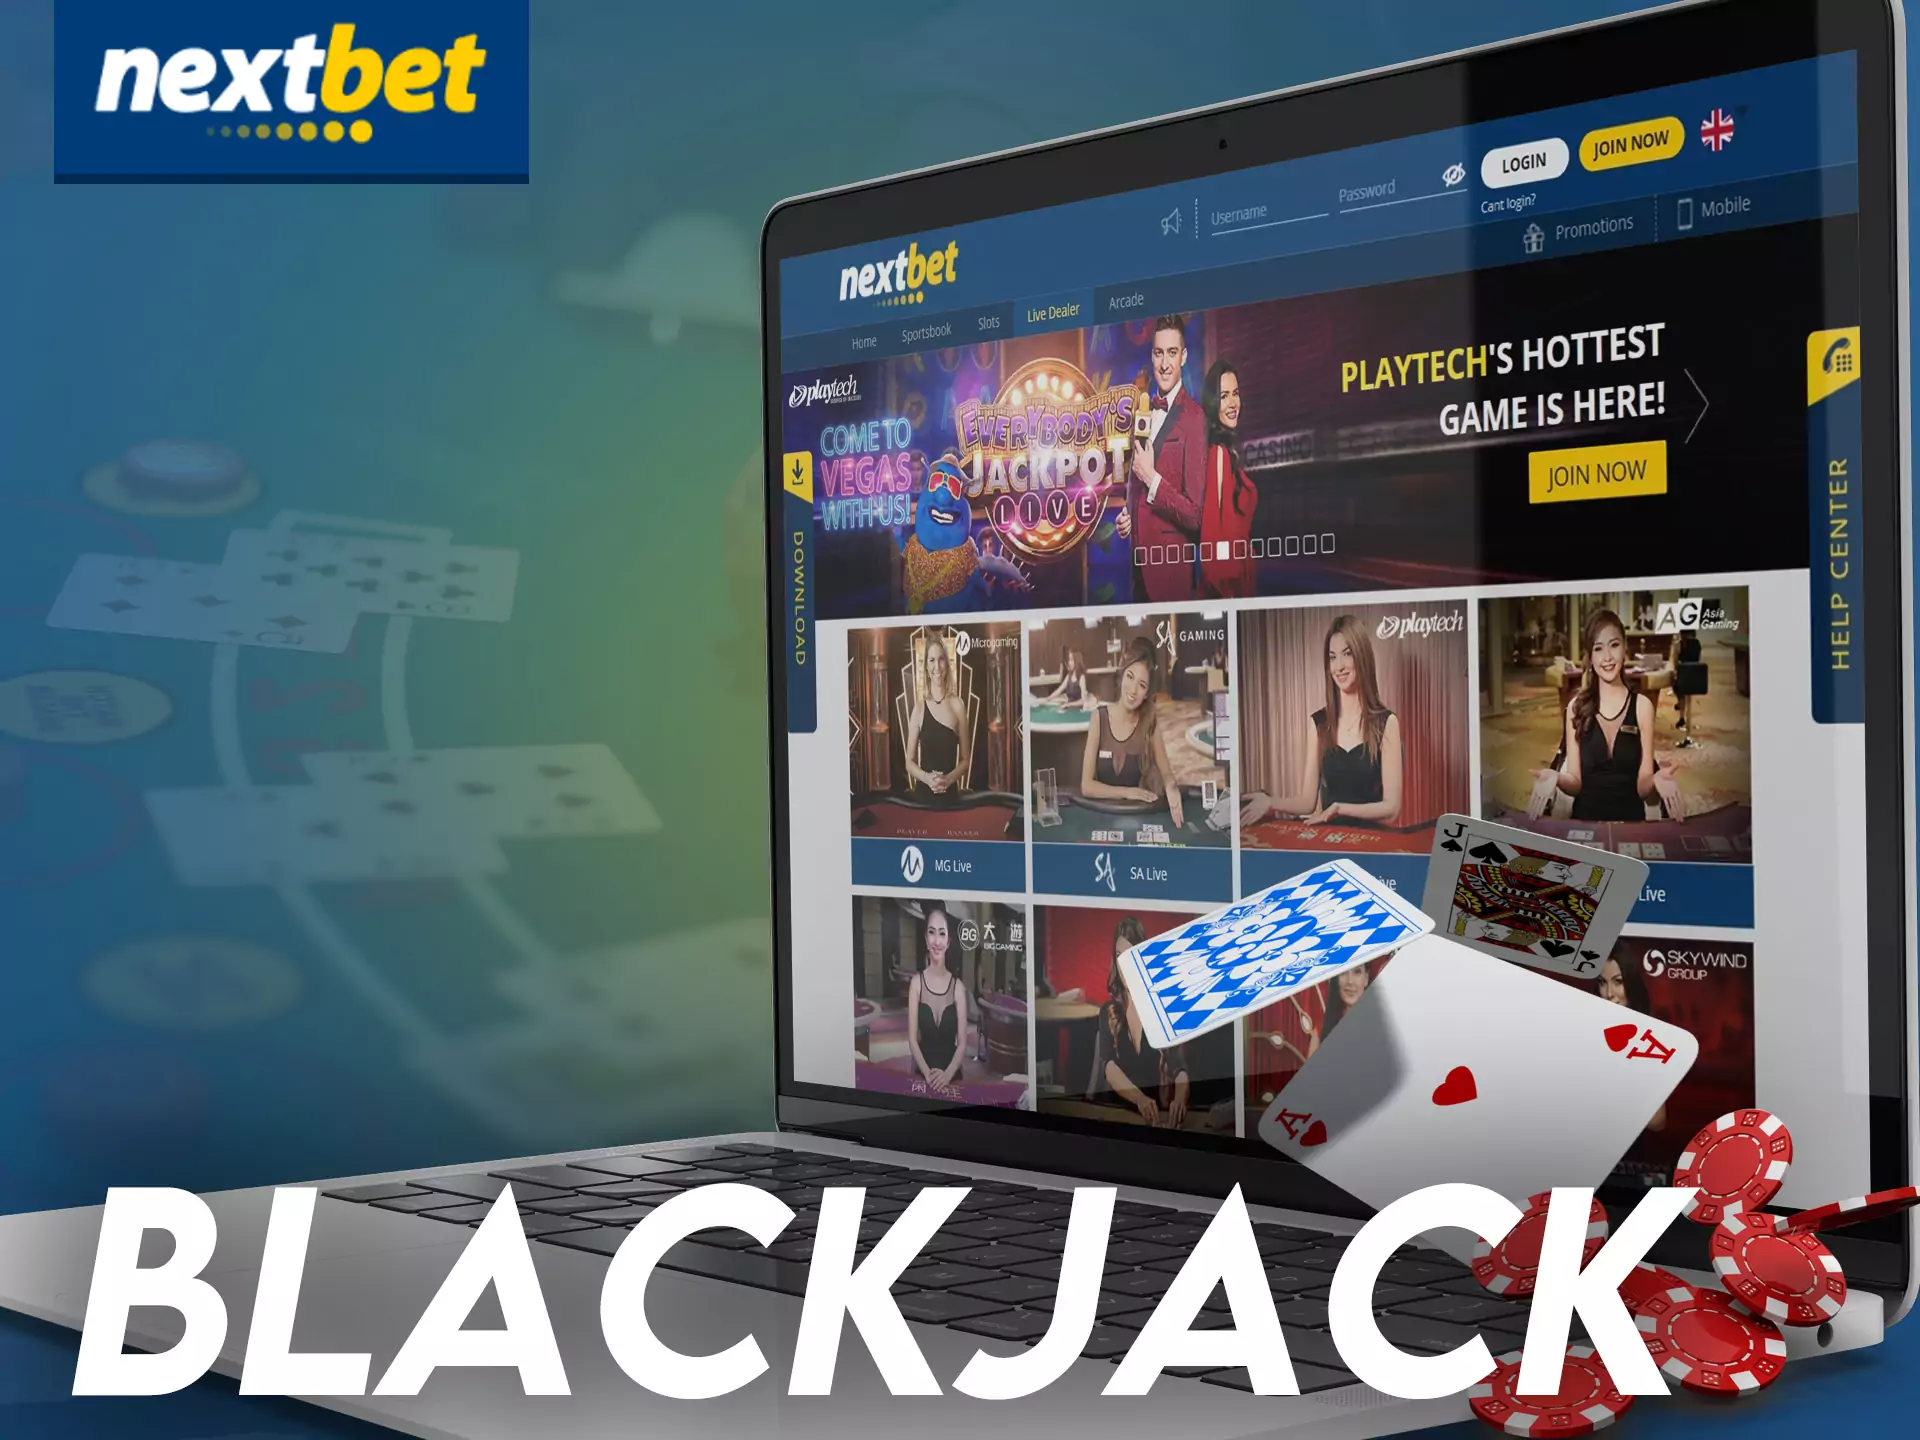 If you are a fan of card games, try to play blackjack at Nextbet Casino.